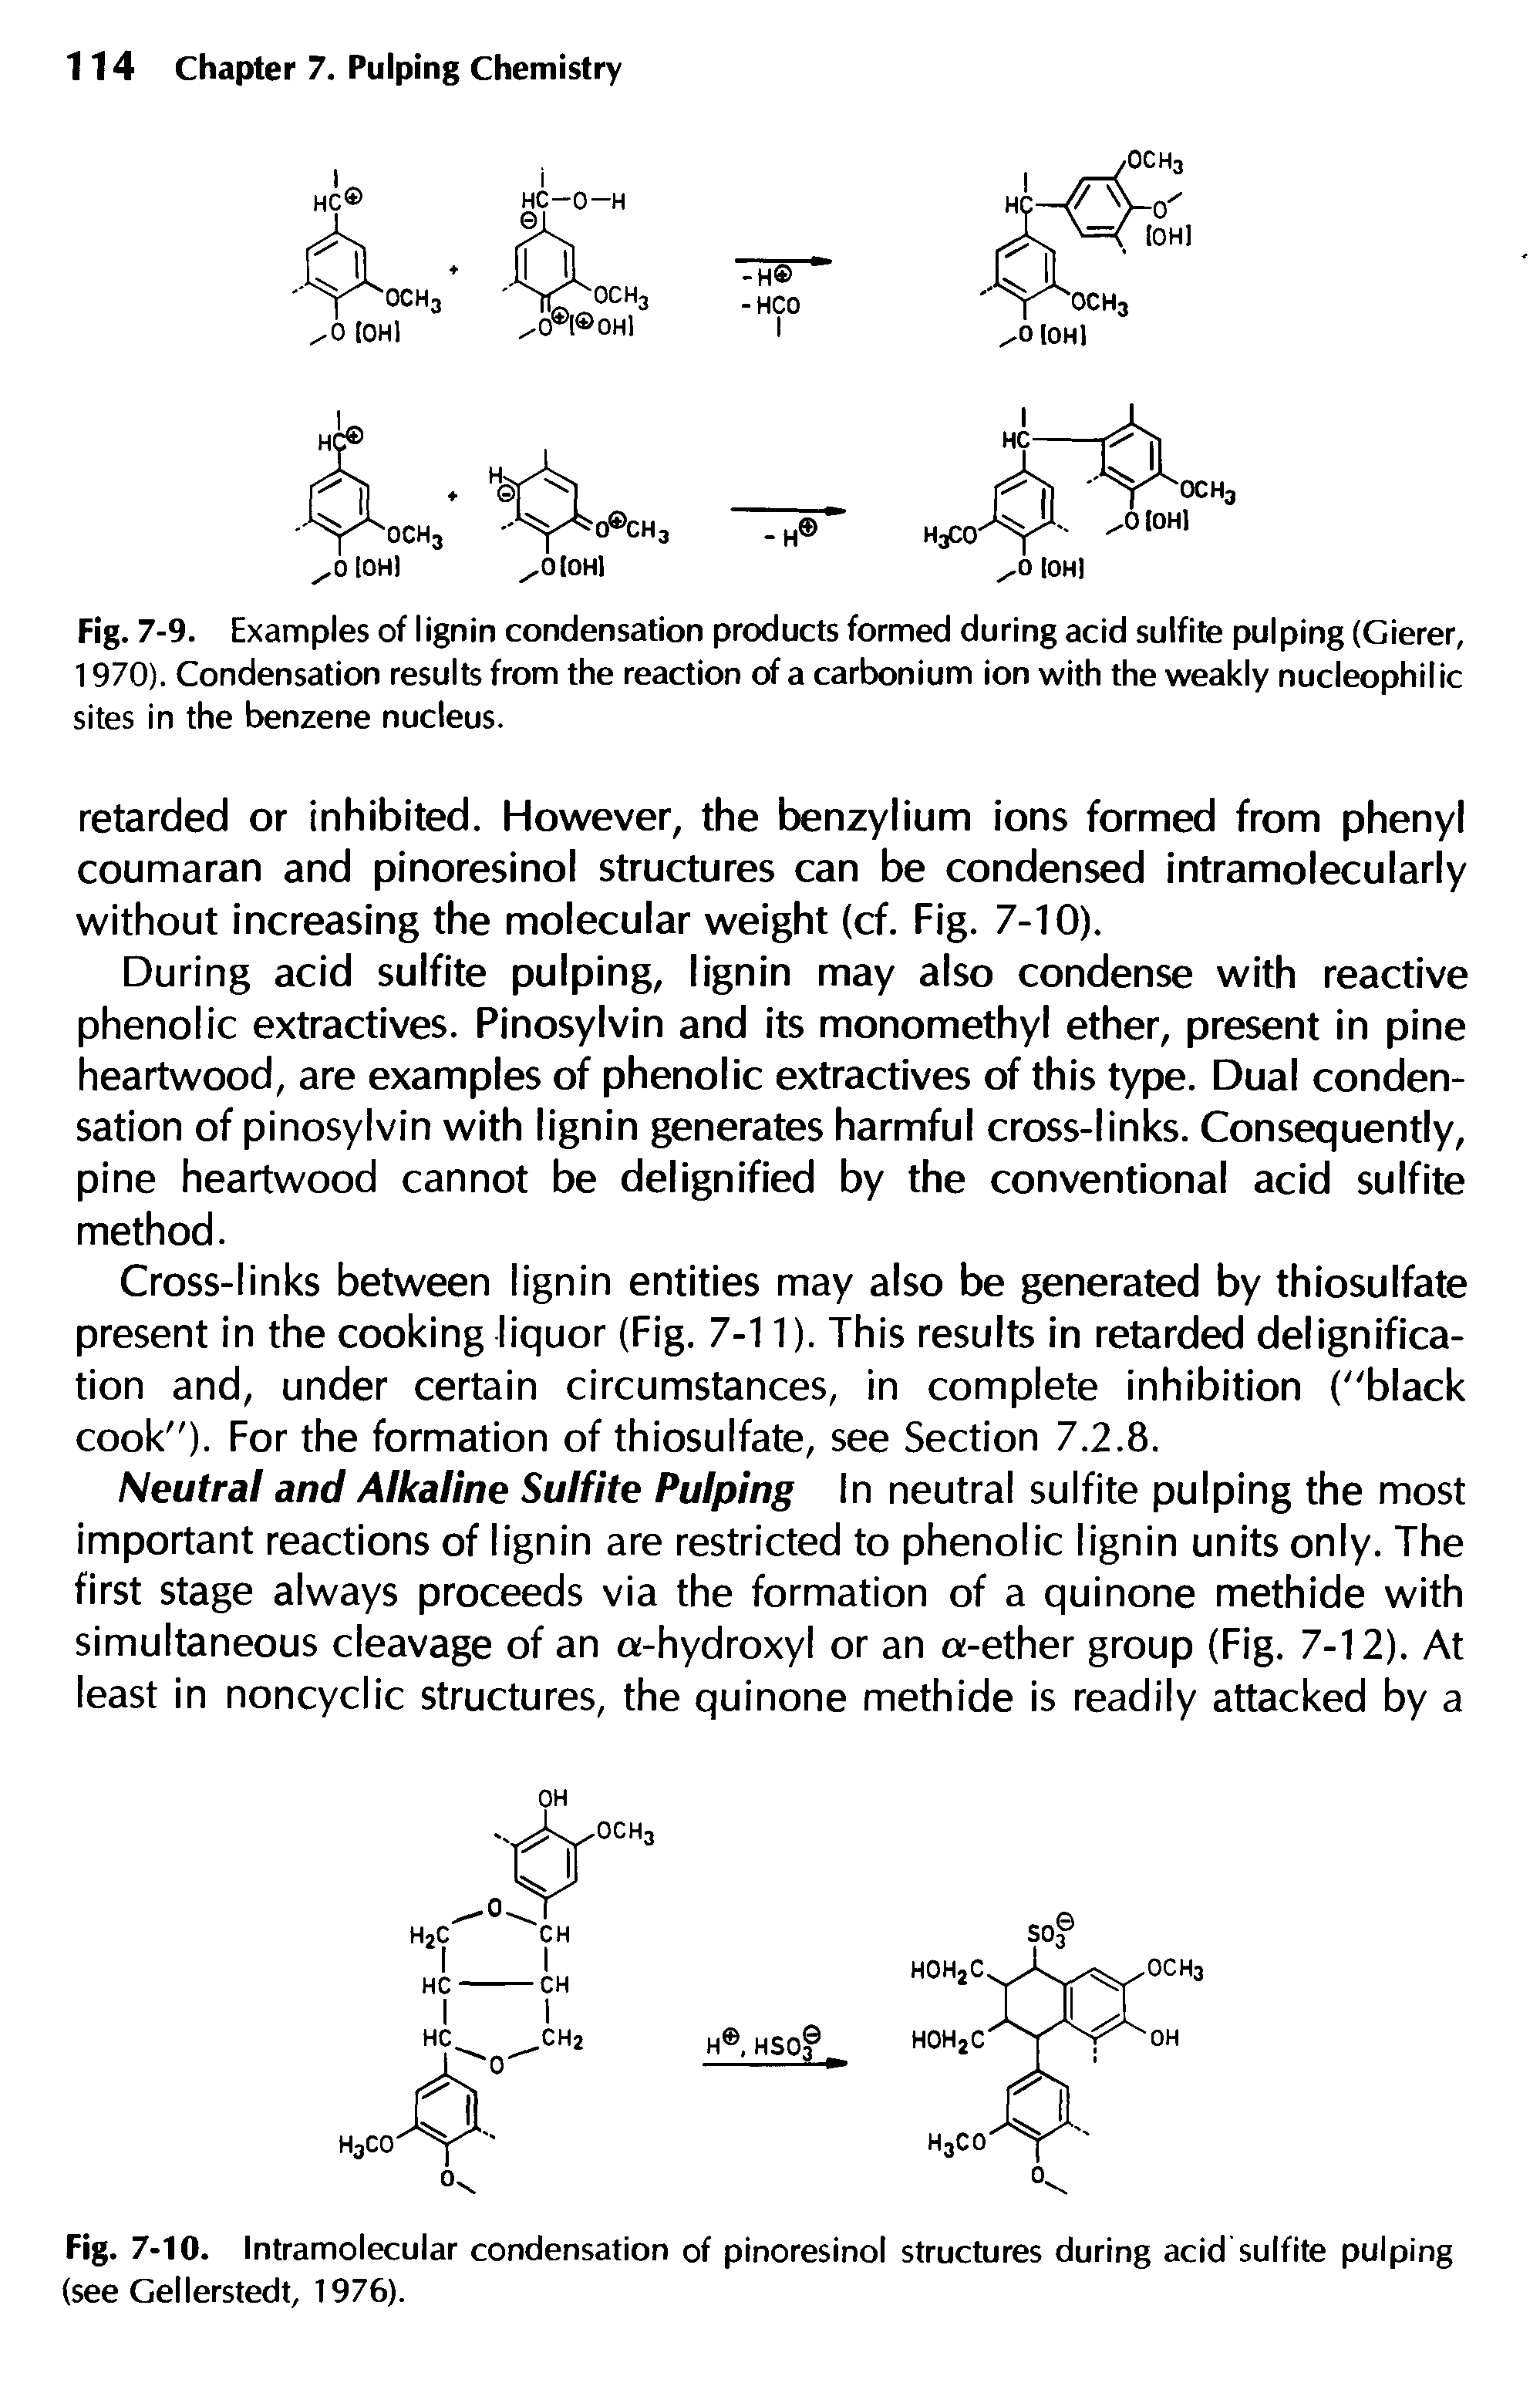 Fig. 7-9. Examples of lignin condensation products formed during acid sulfite pulping (Gierer, 1970). Condensation results from the reaction of a carbonium ion with the weakly nucleophilic sites in the benzene nucleus.